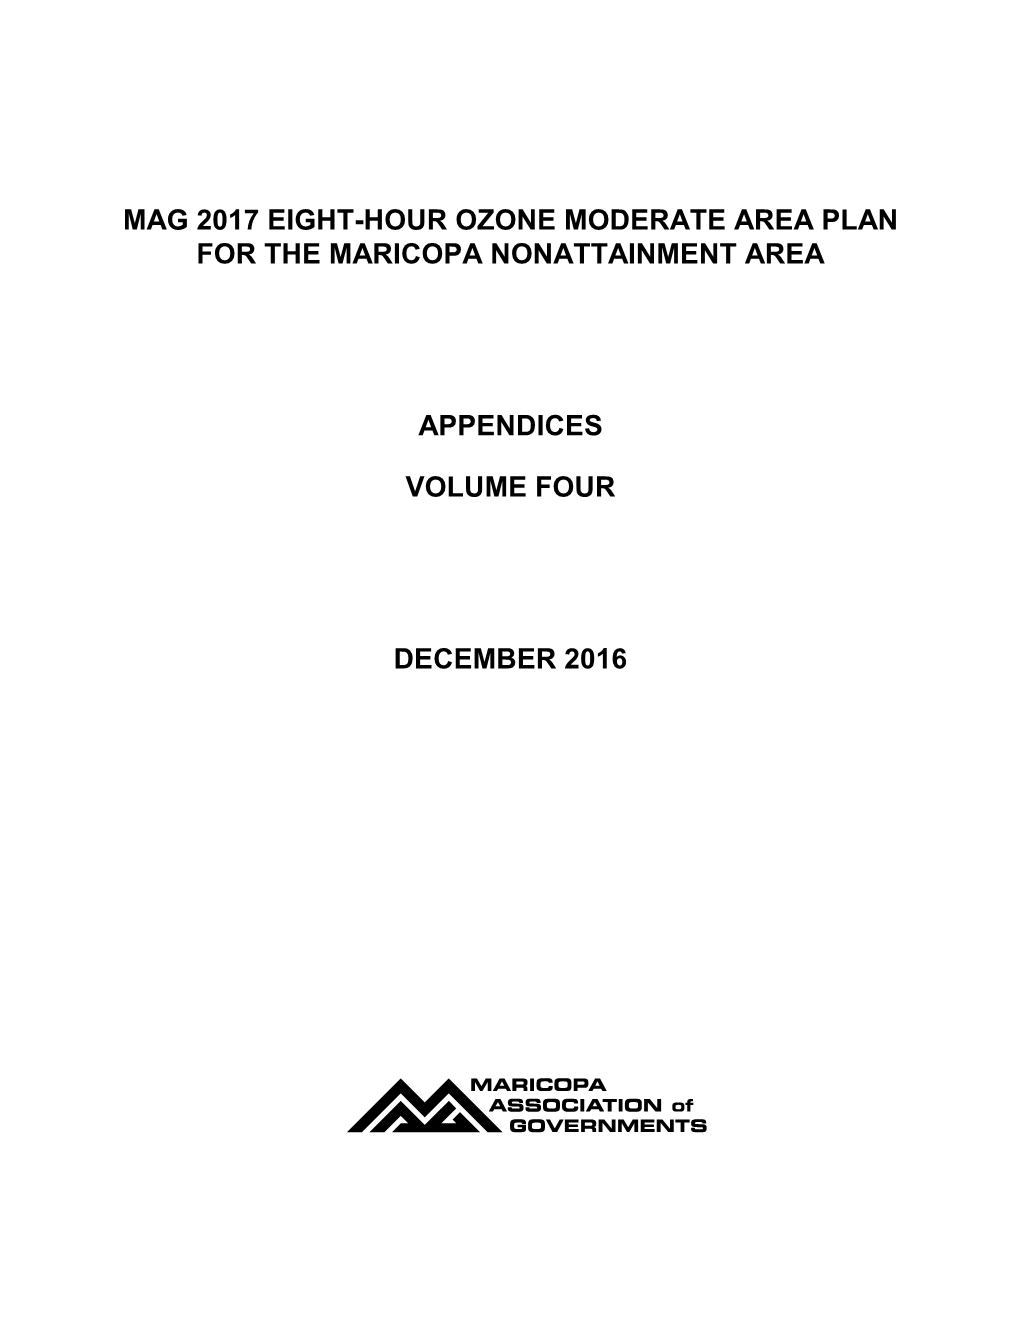 Mag 2017 Eight-Hour Ozone Moderate Area Plan for the Maricopa Nonattainment Area